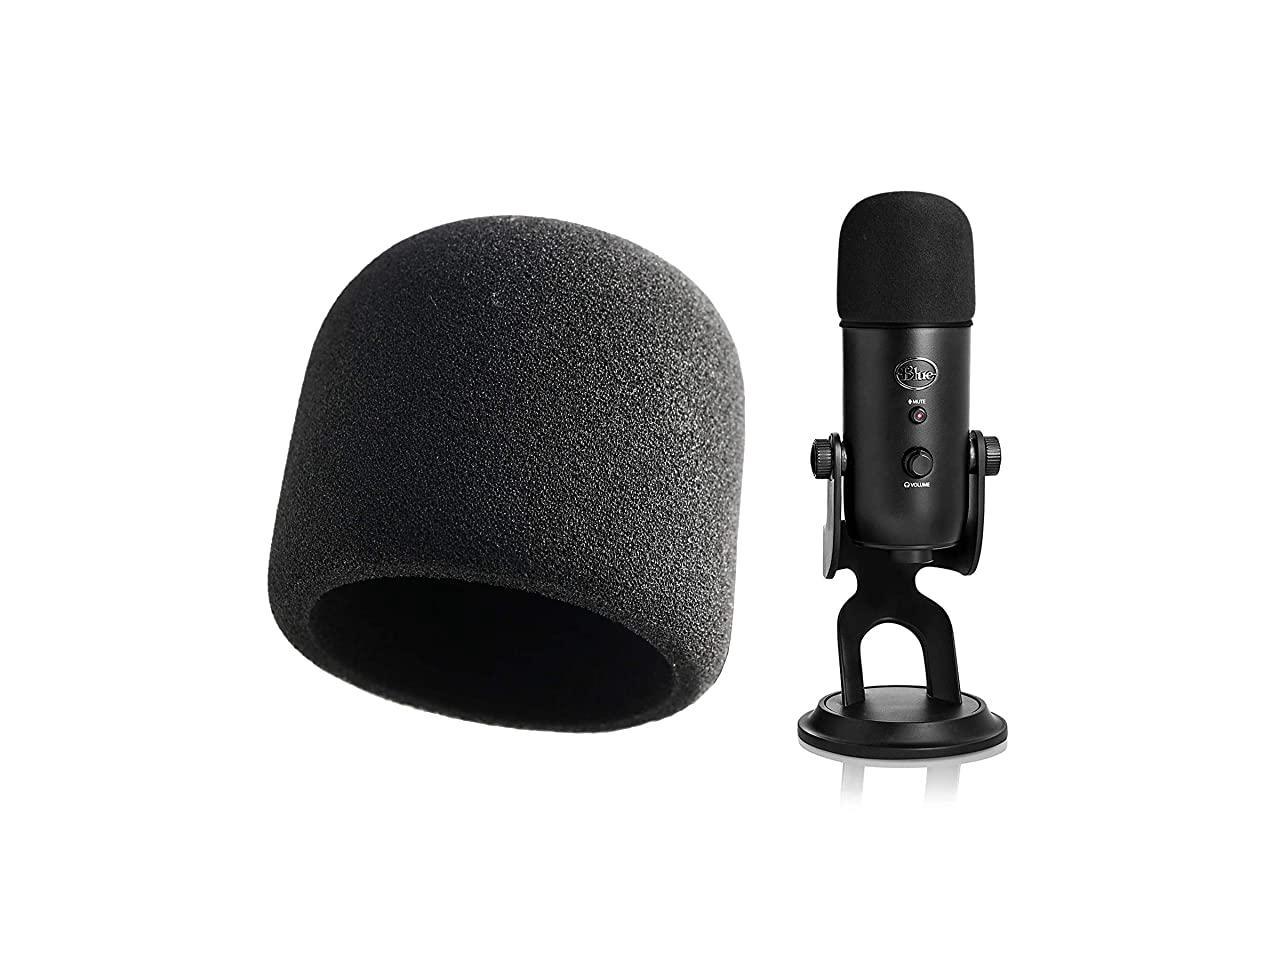 Cardioid Blue Snowball iCE Condenser Microphone Black with Dragonpad Pop Filter 